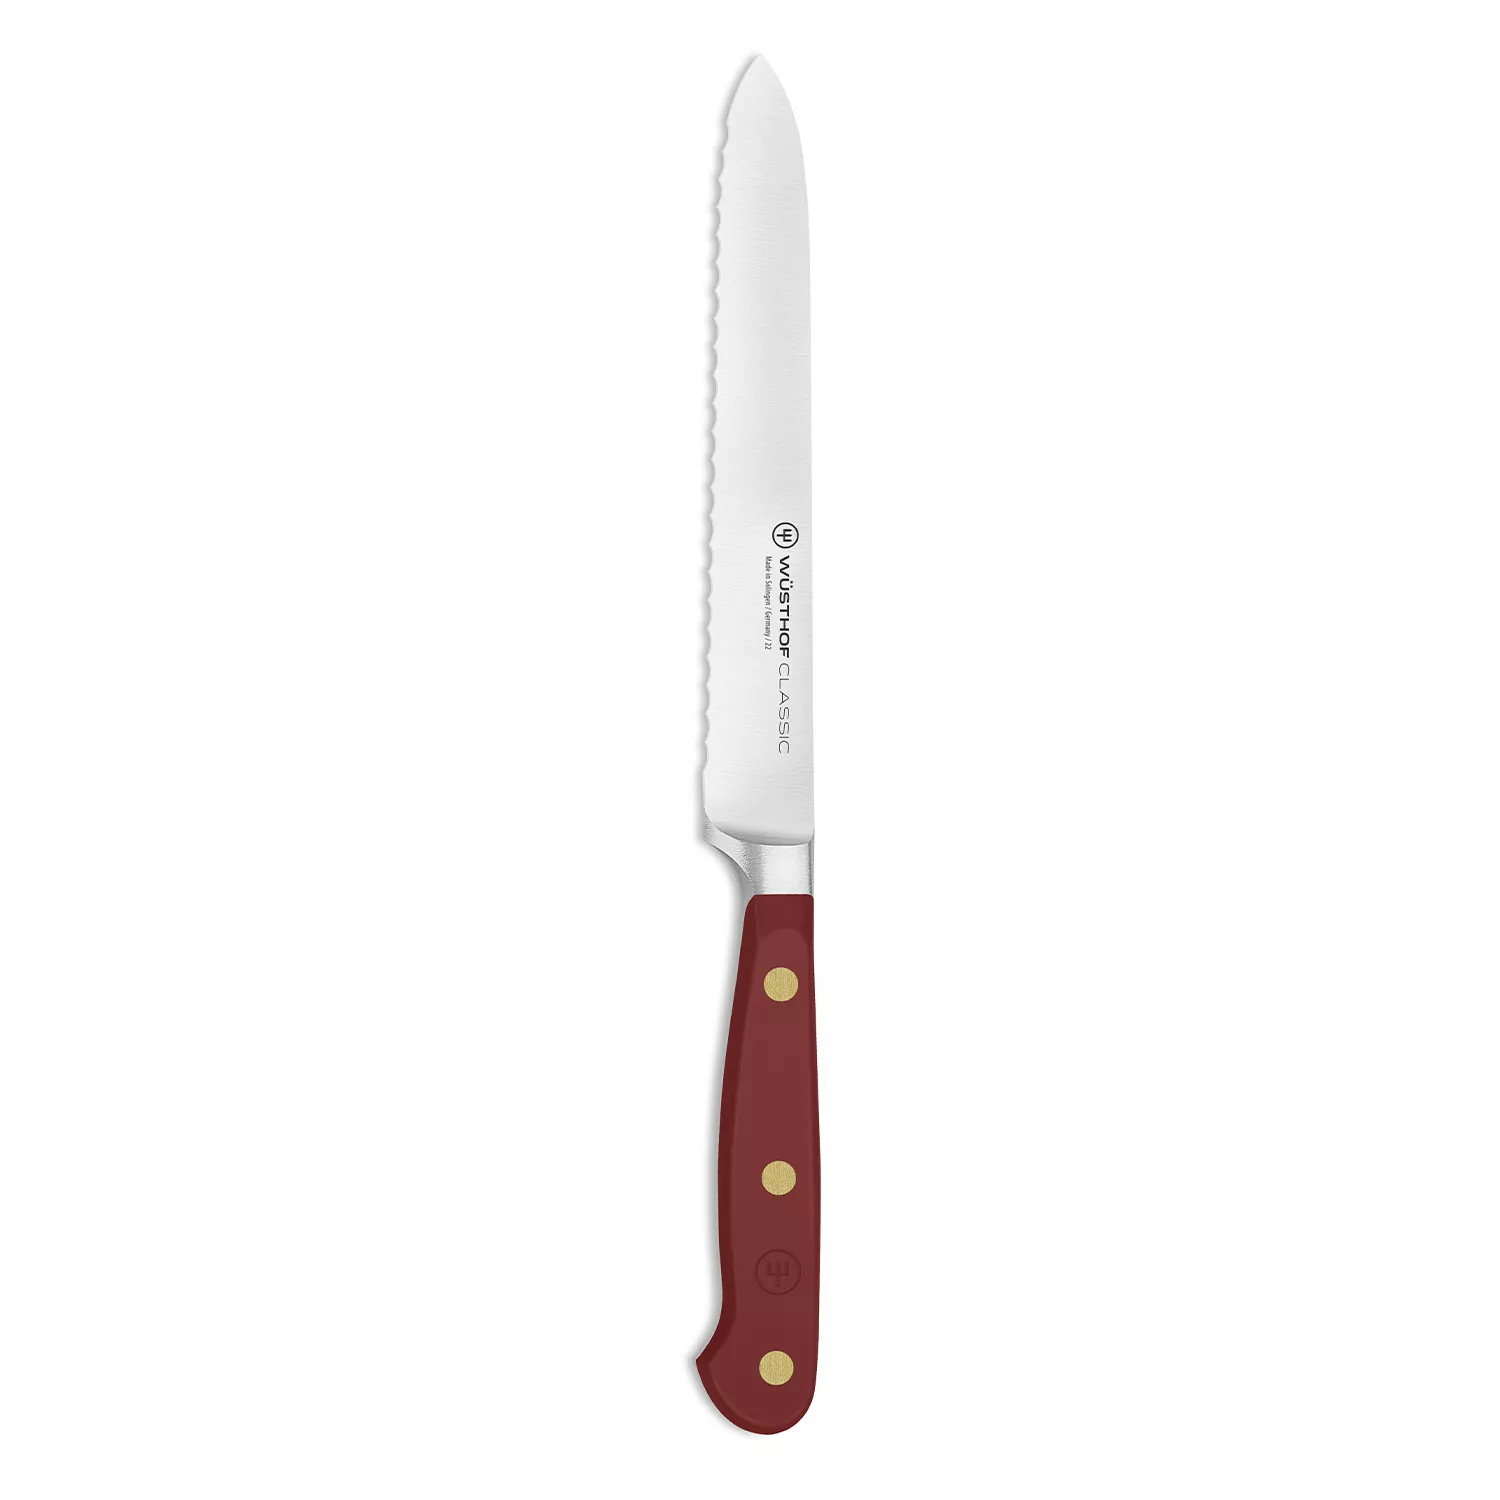 Wüsthof Classic 5 Serrated Utility Knife + Reviews